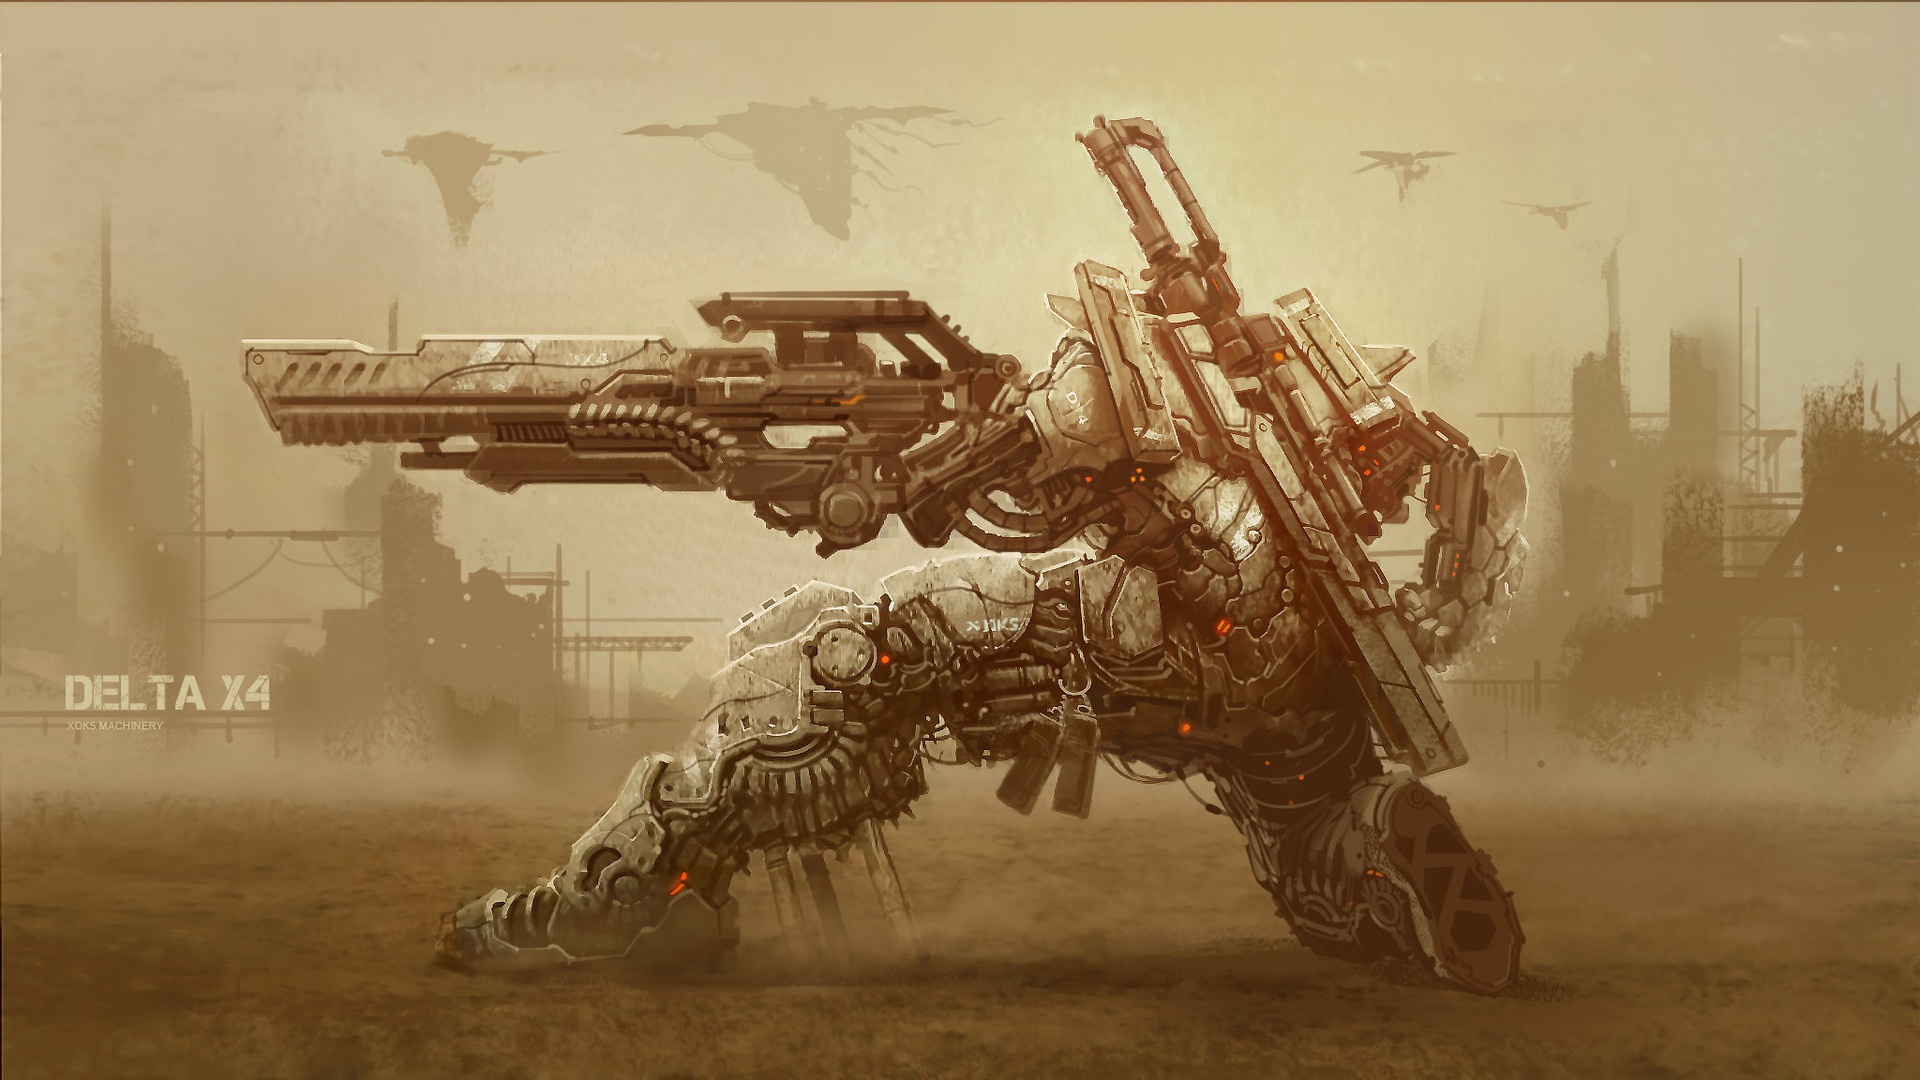 Scifi Military Heavy Soldier Weapon Concept Art Robot Concept Art Robots Concept